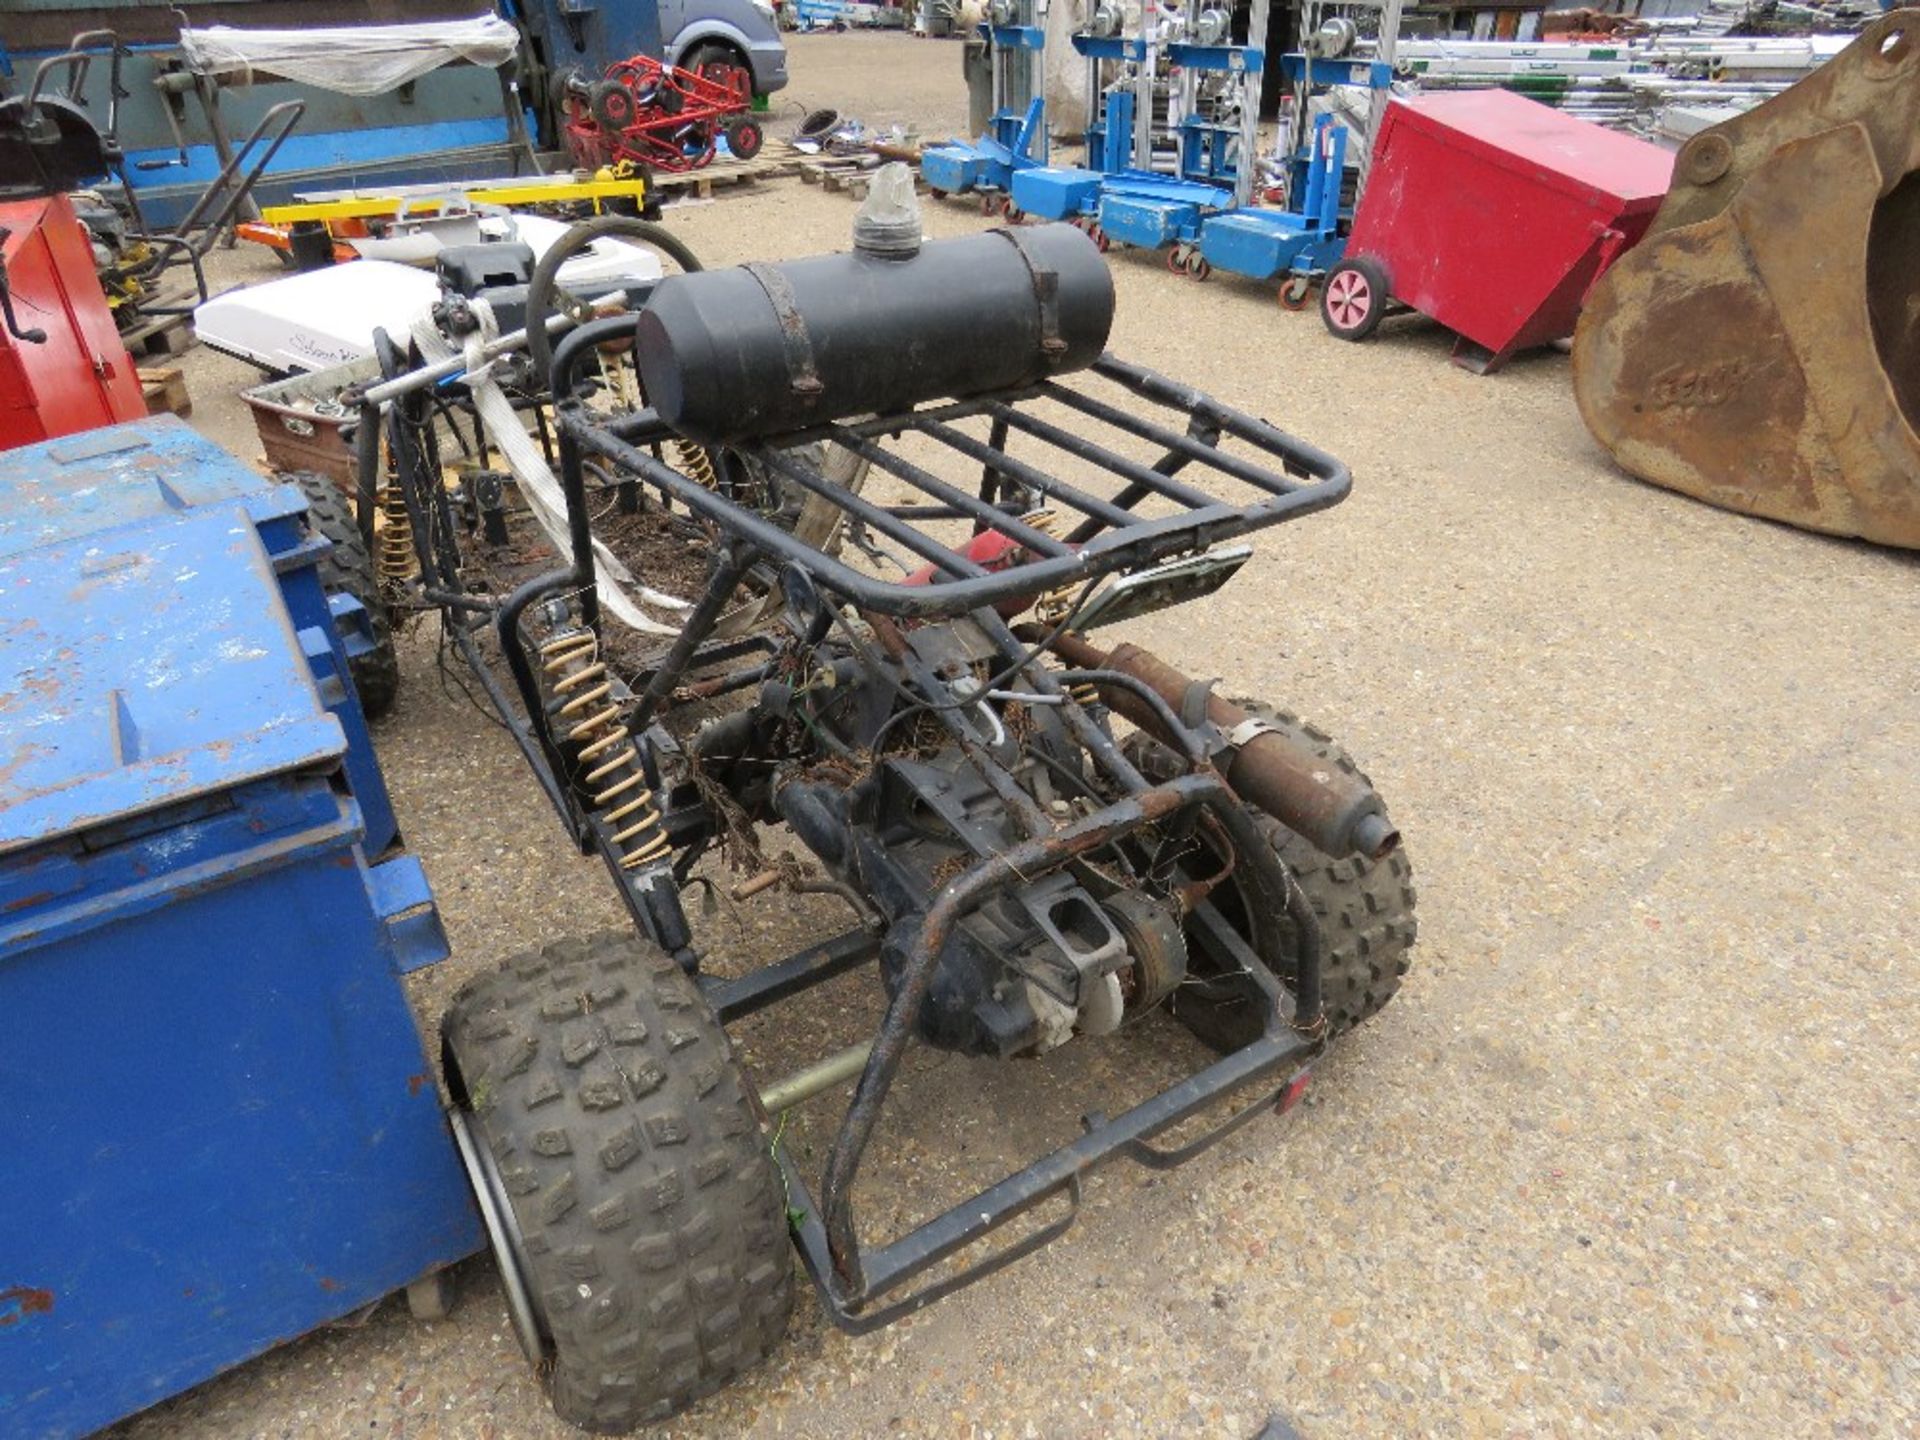 4 WHEEL OFF ROAD BUGGY. CONDITION UNKNOWN. - Image 2 of 2